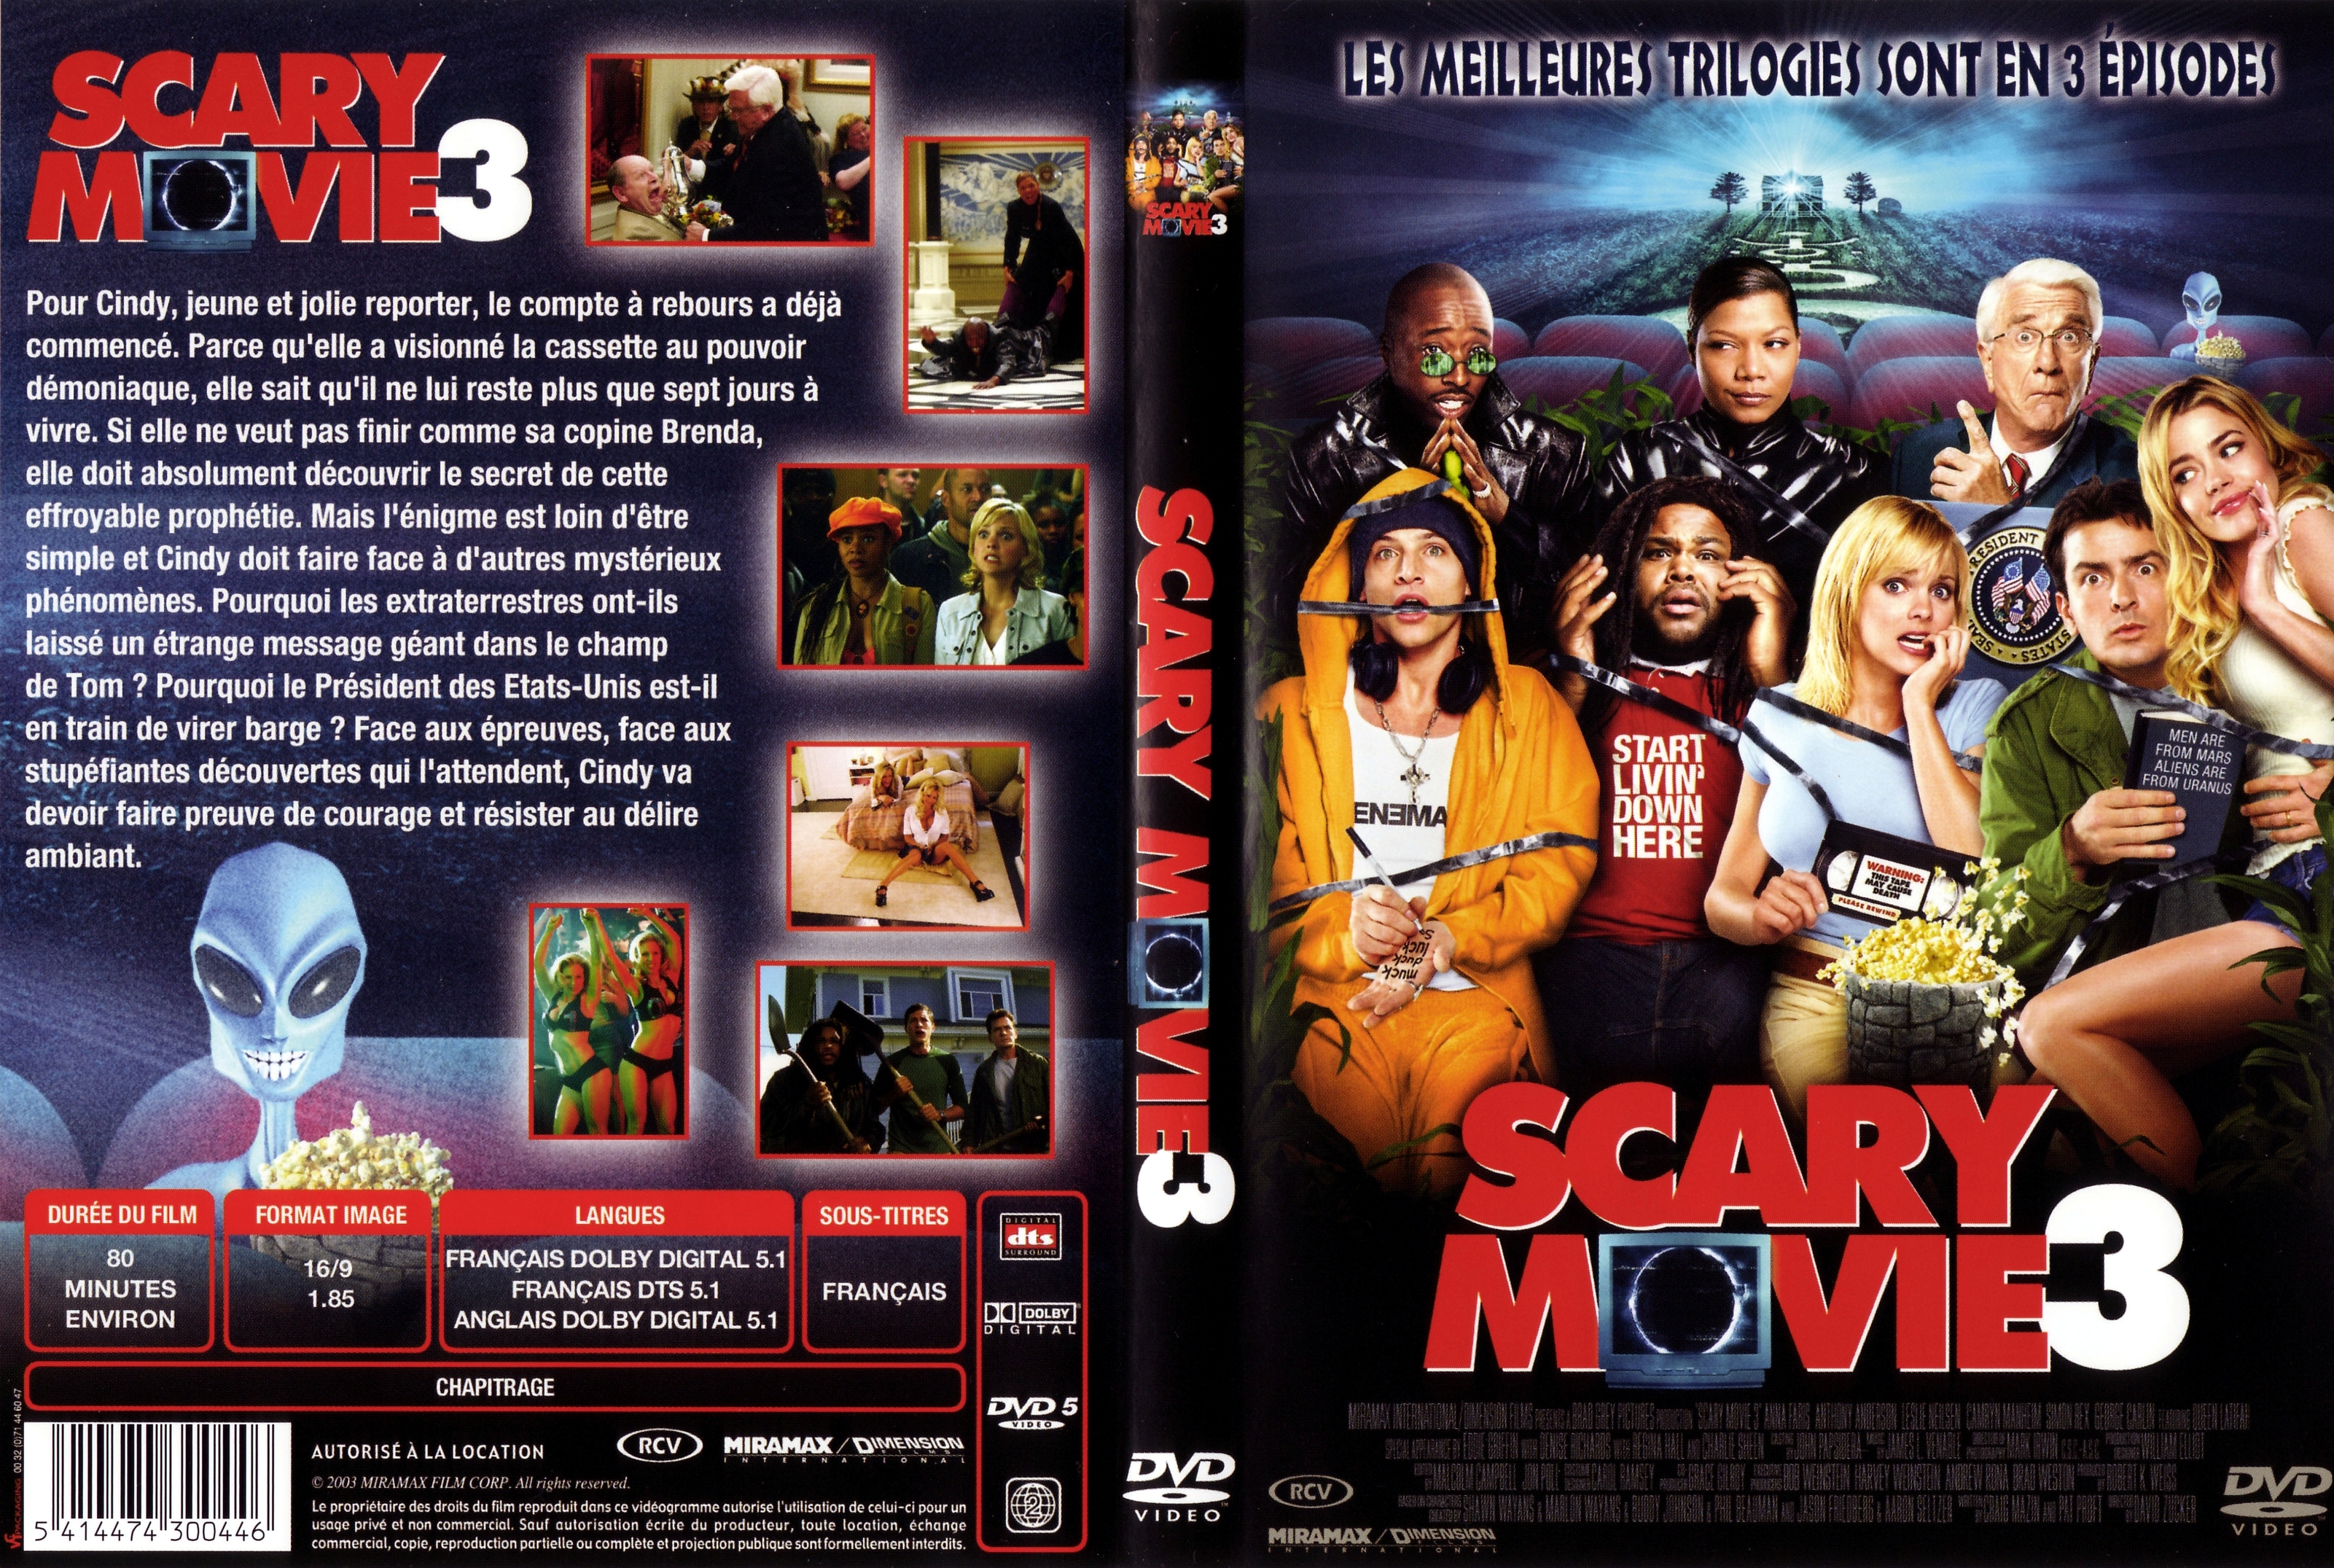 Jaquette DVD Scary movie 3 v3